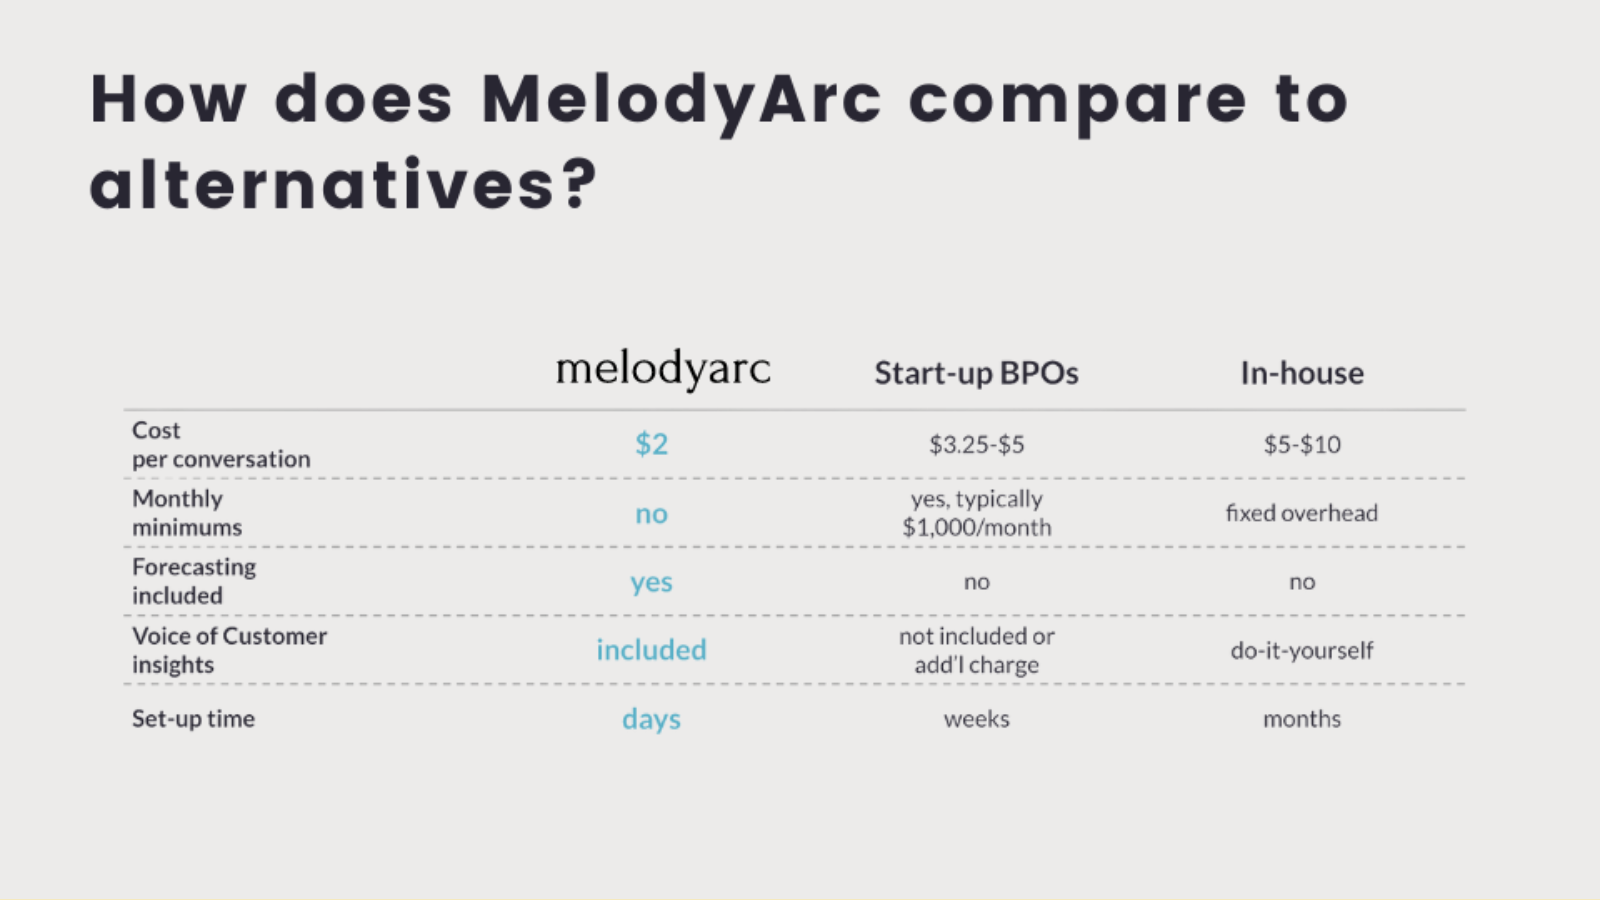 How does MelodyArc compare to alternatives?